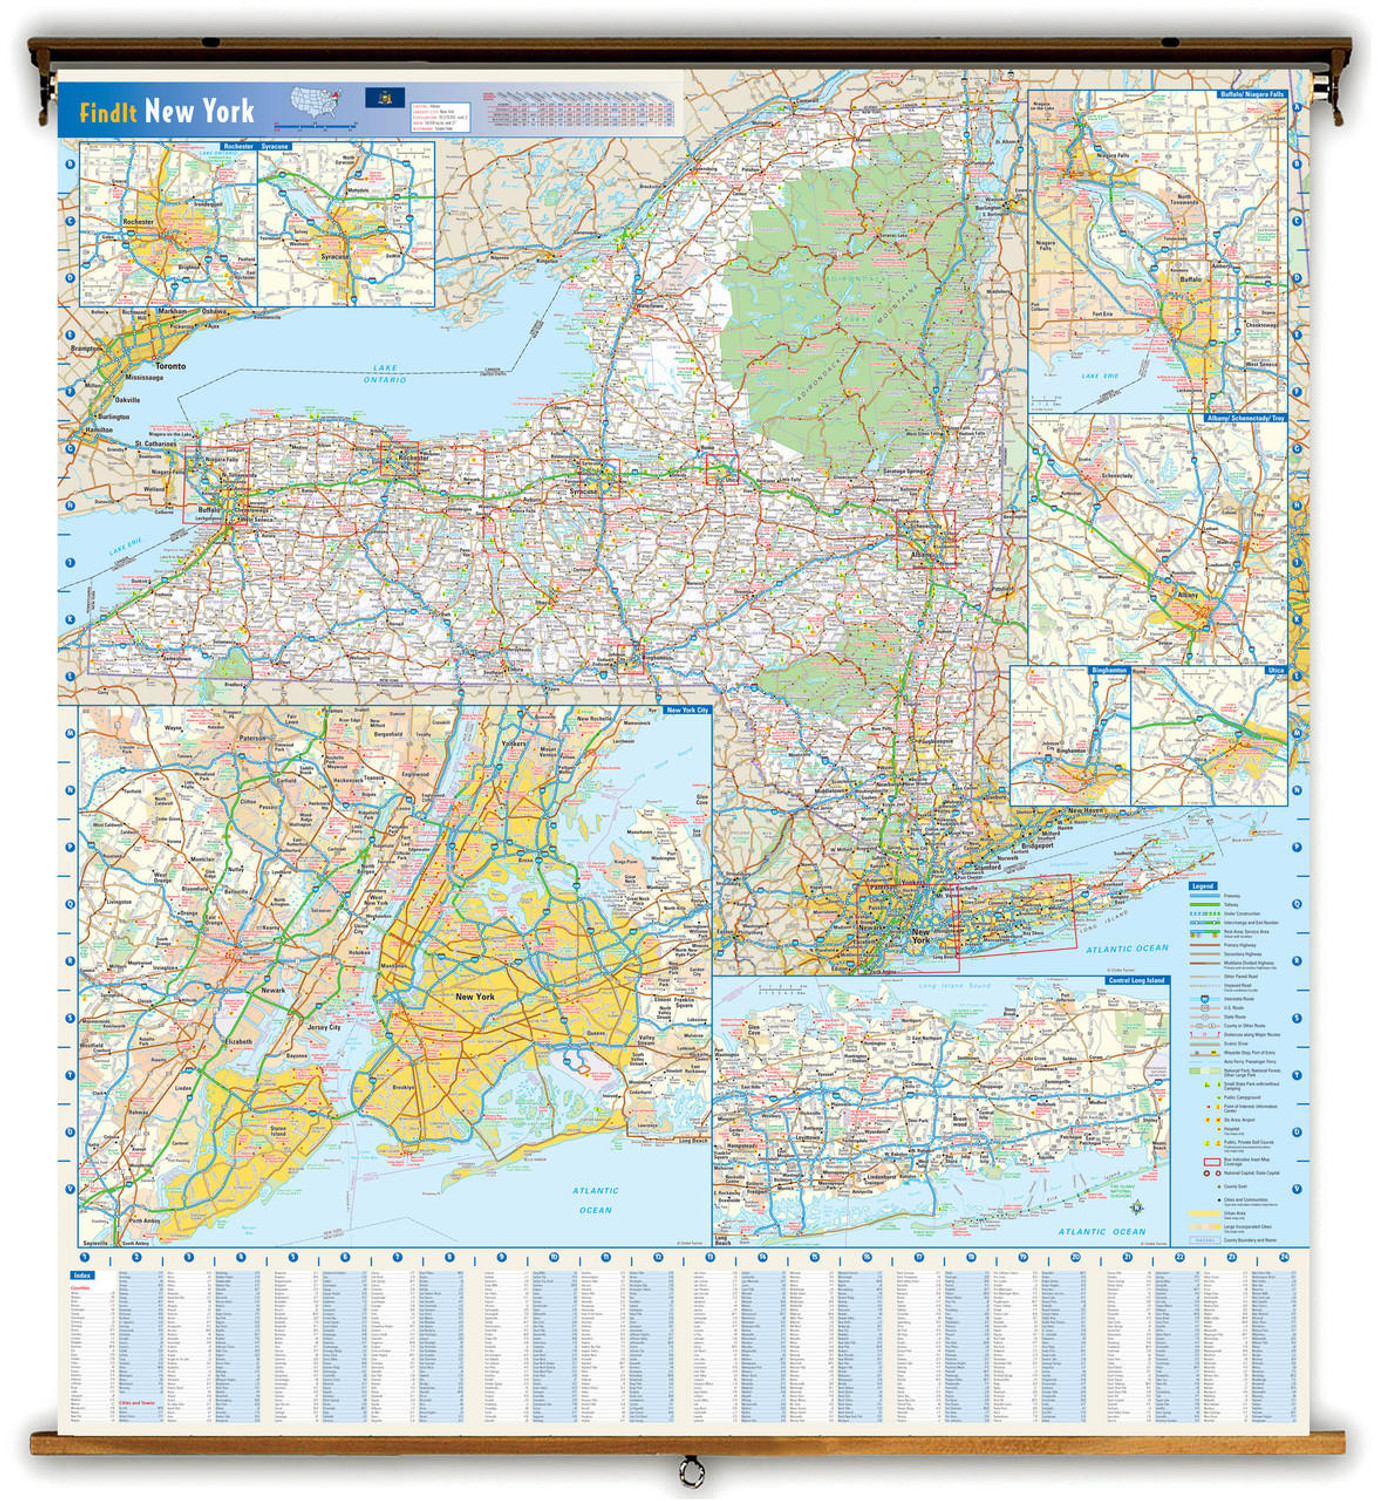 New York State Reference Spring Roller Map, image 1, World Maps Online